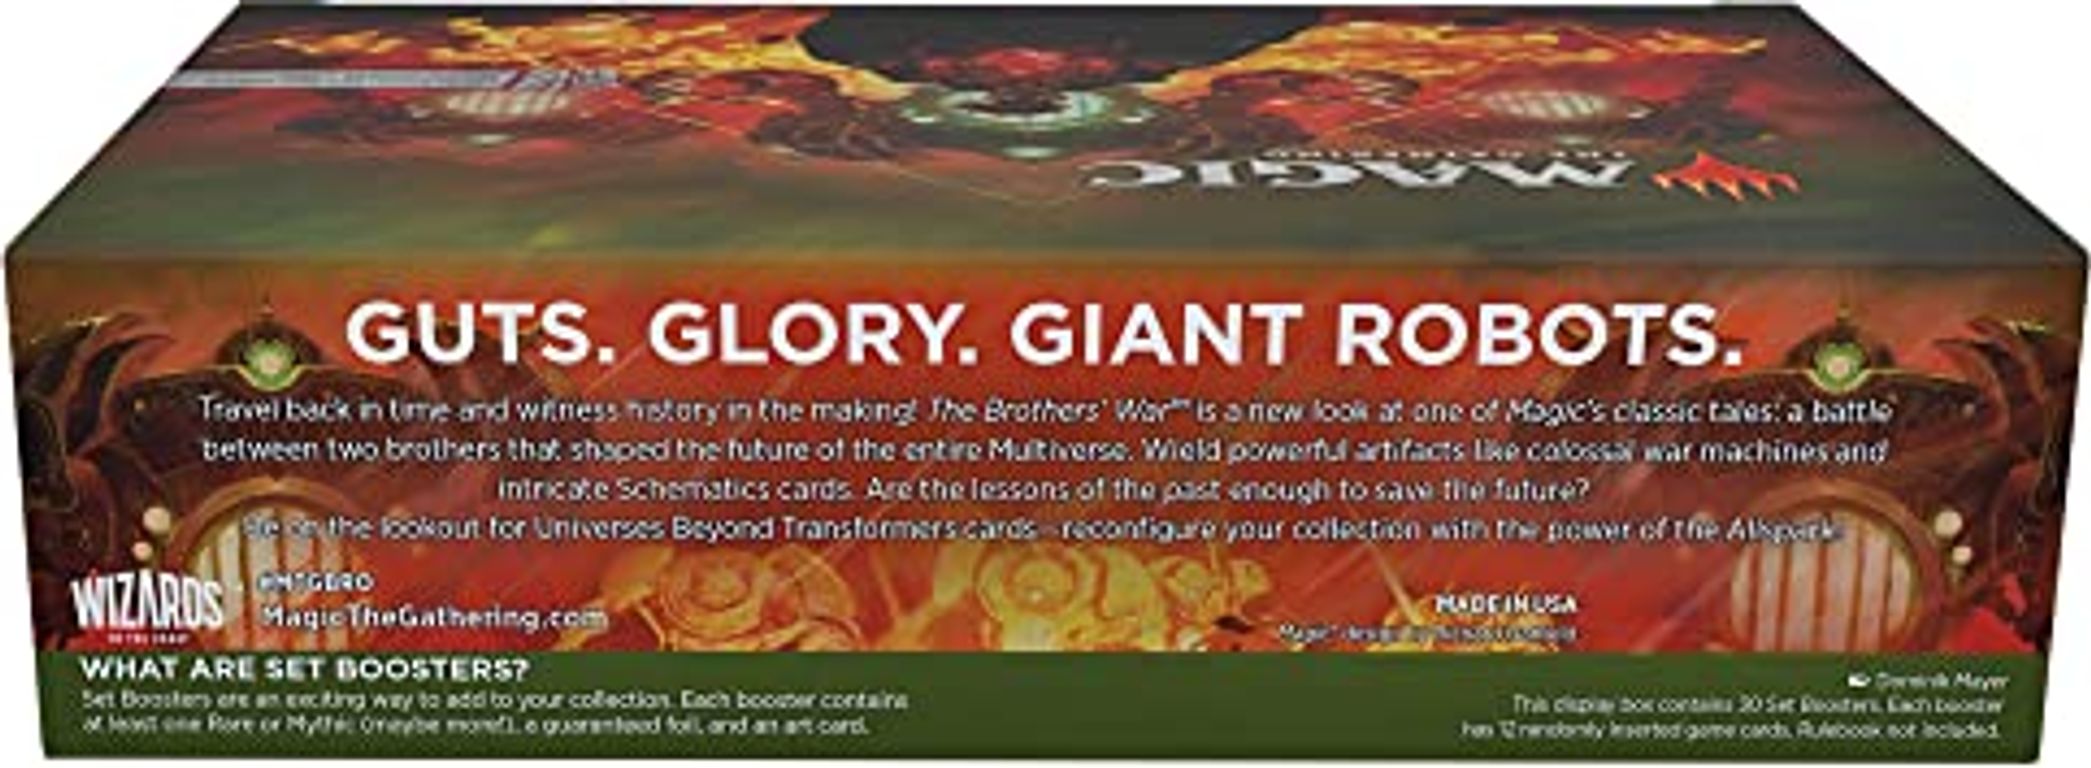 Magic The Gathering Brothers' War Set Booster Box back of the box